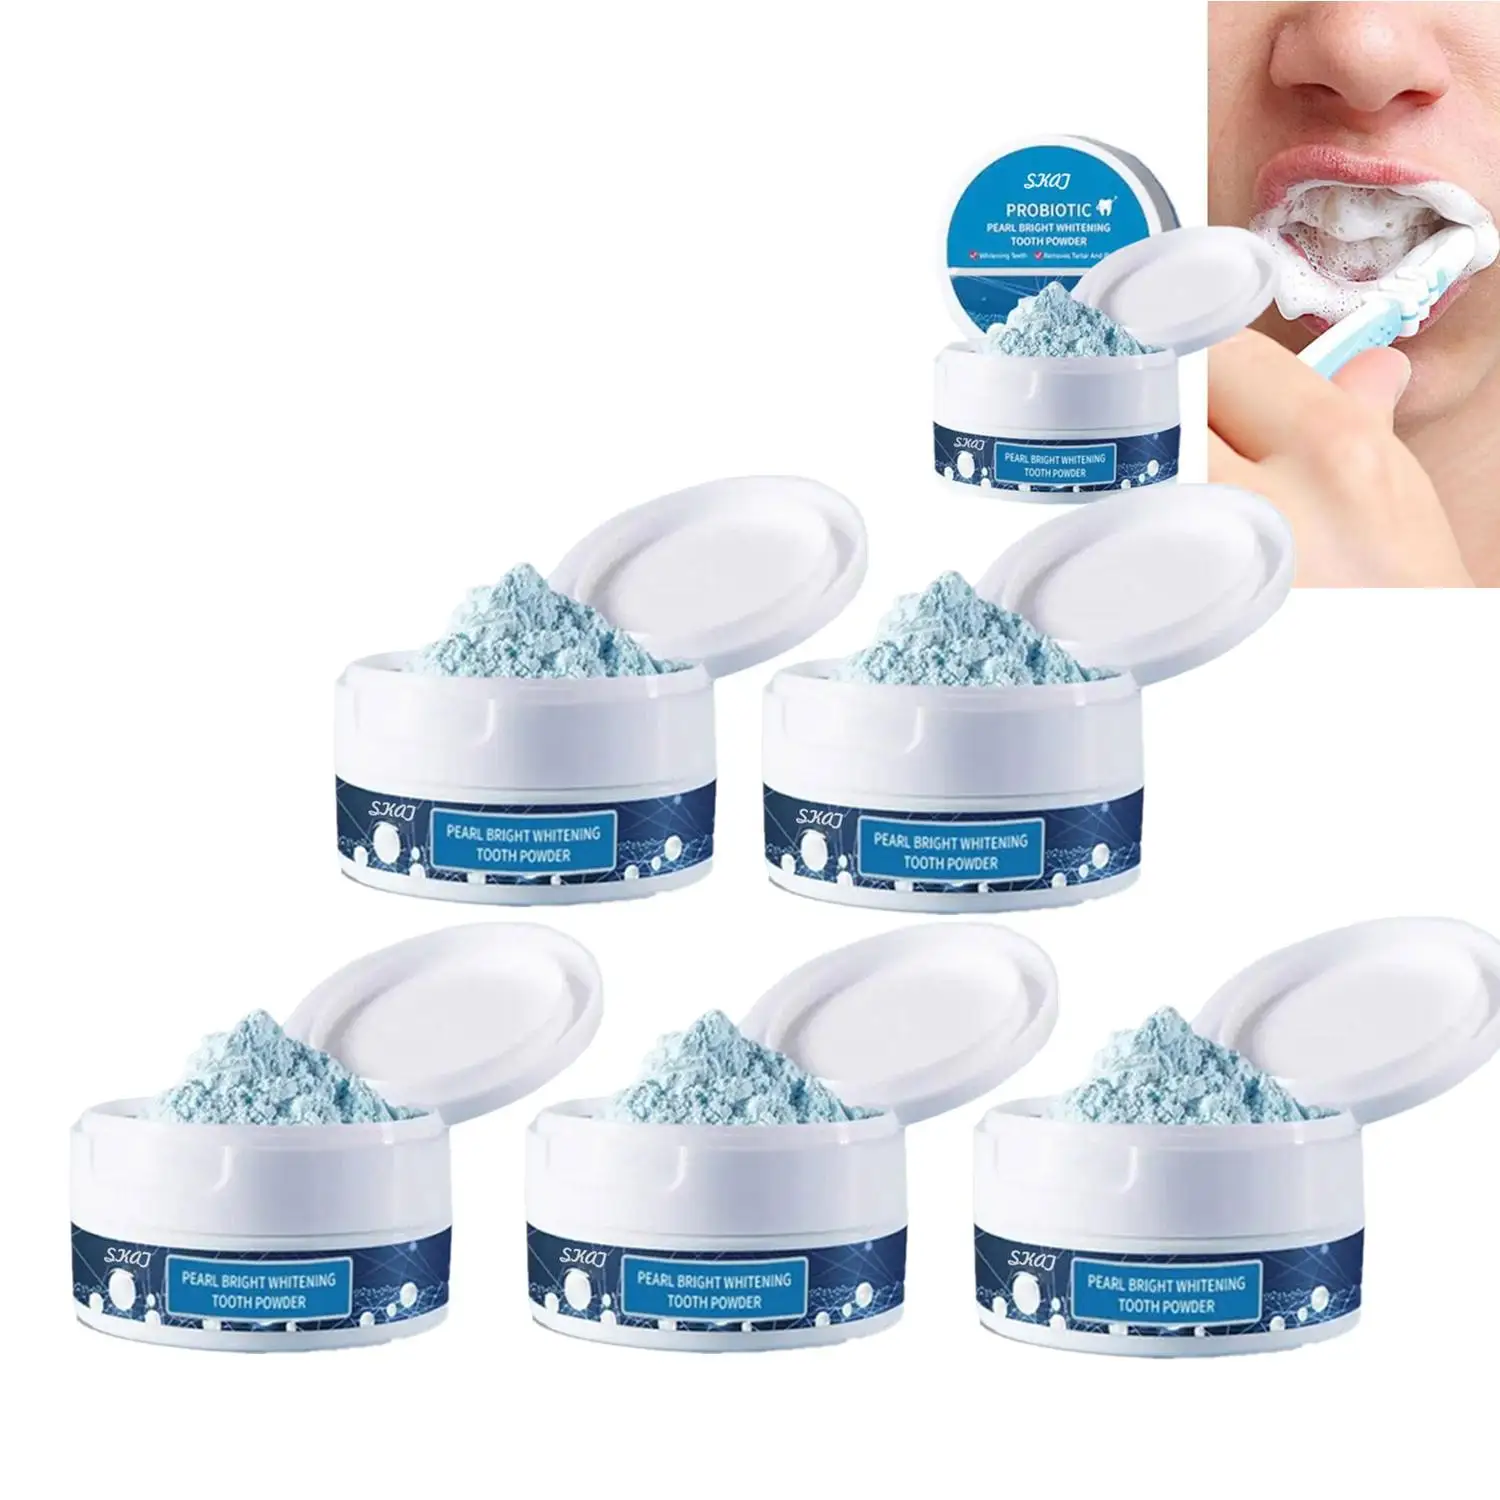 

5X Teeth Whitening Powder Pearl Essence Remove Stains Natural Dental Toothpaste Against Dental Caries Dental Tooth Cleaning Tool